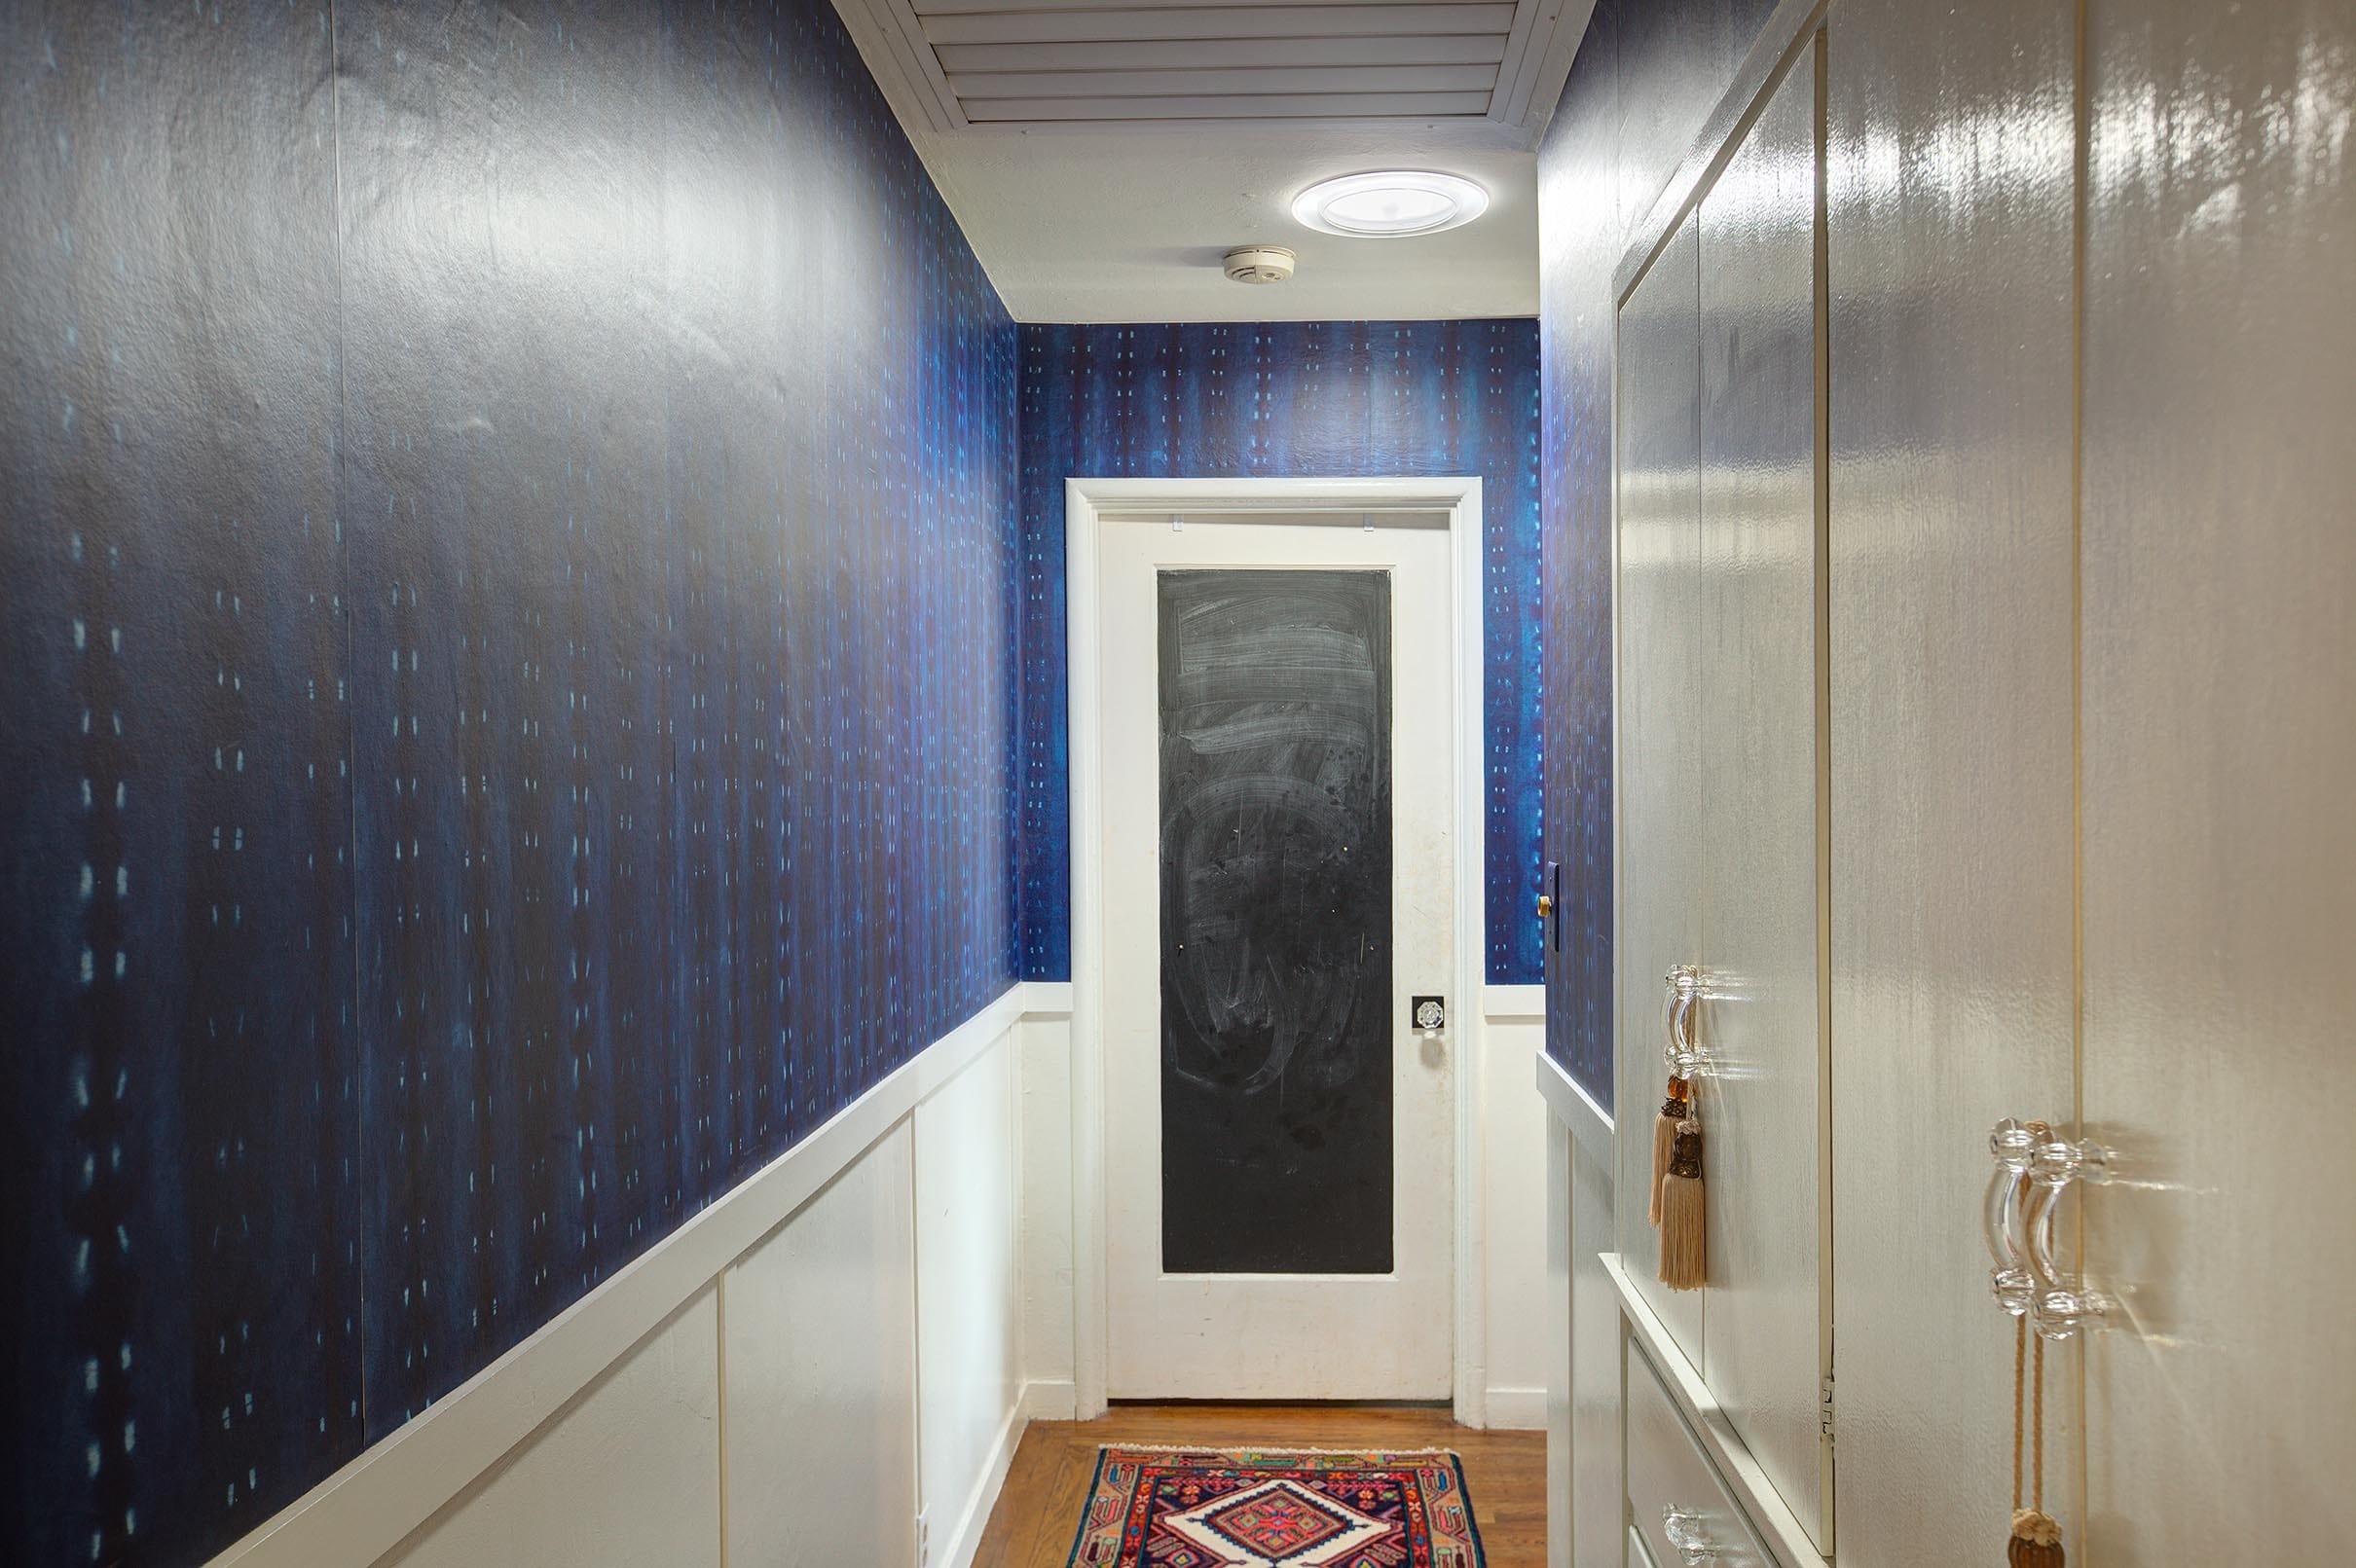 A Sun Tunnel skylight brightens a hallway with dark blue wallpaper and a vintage runner rug.